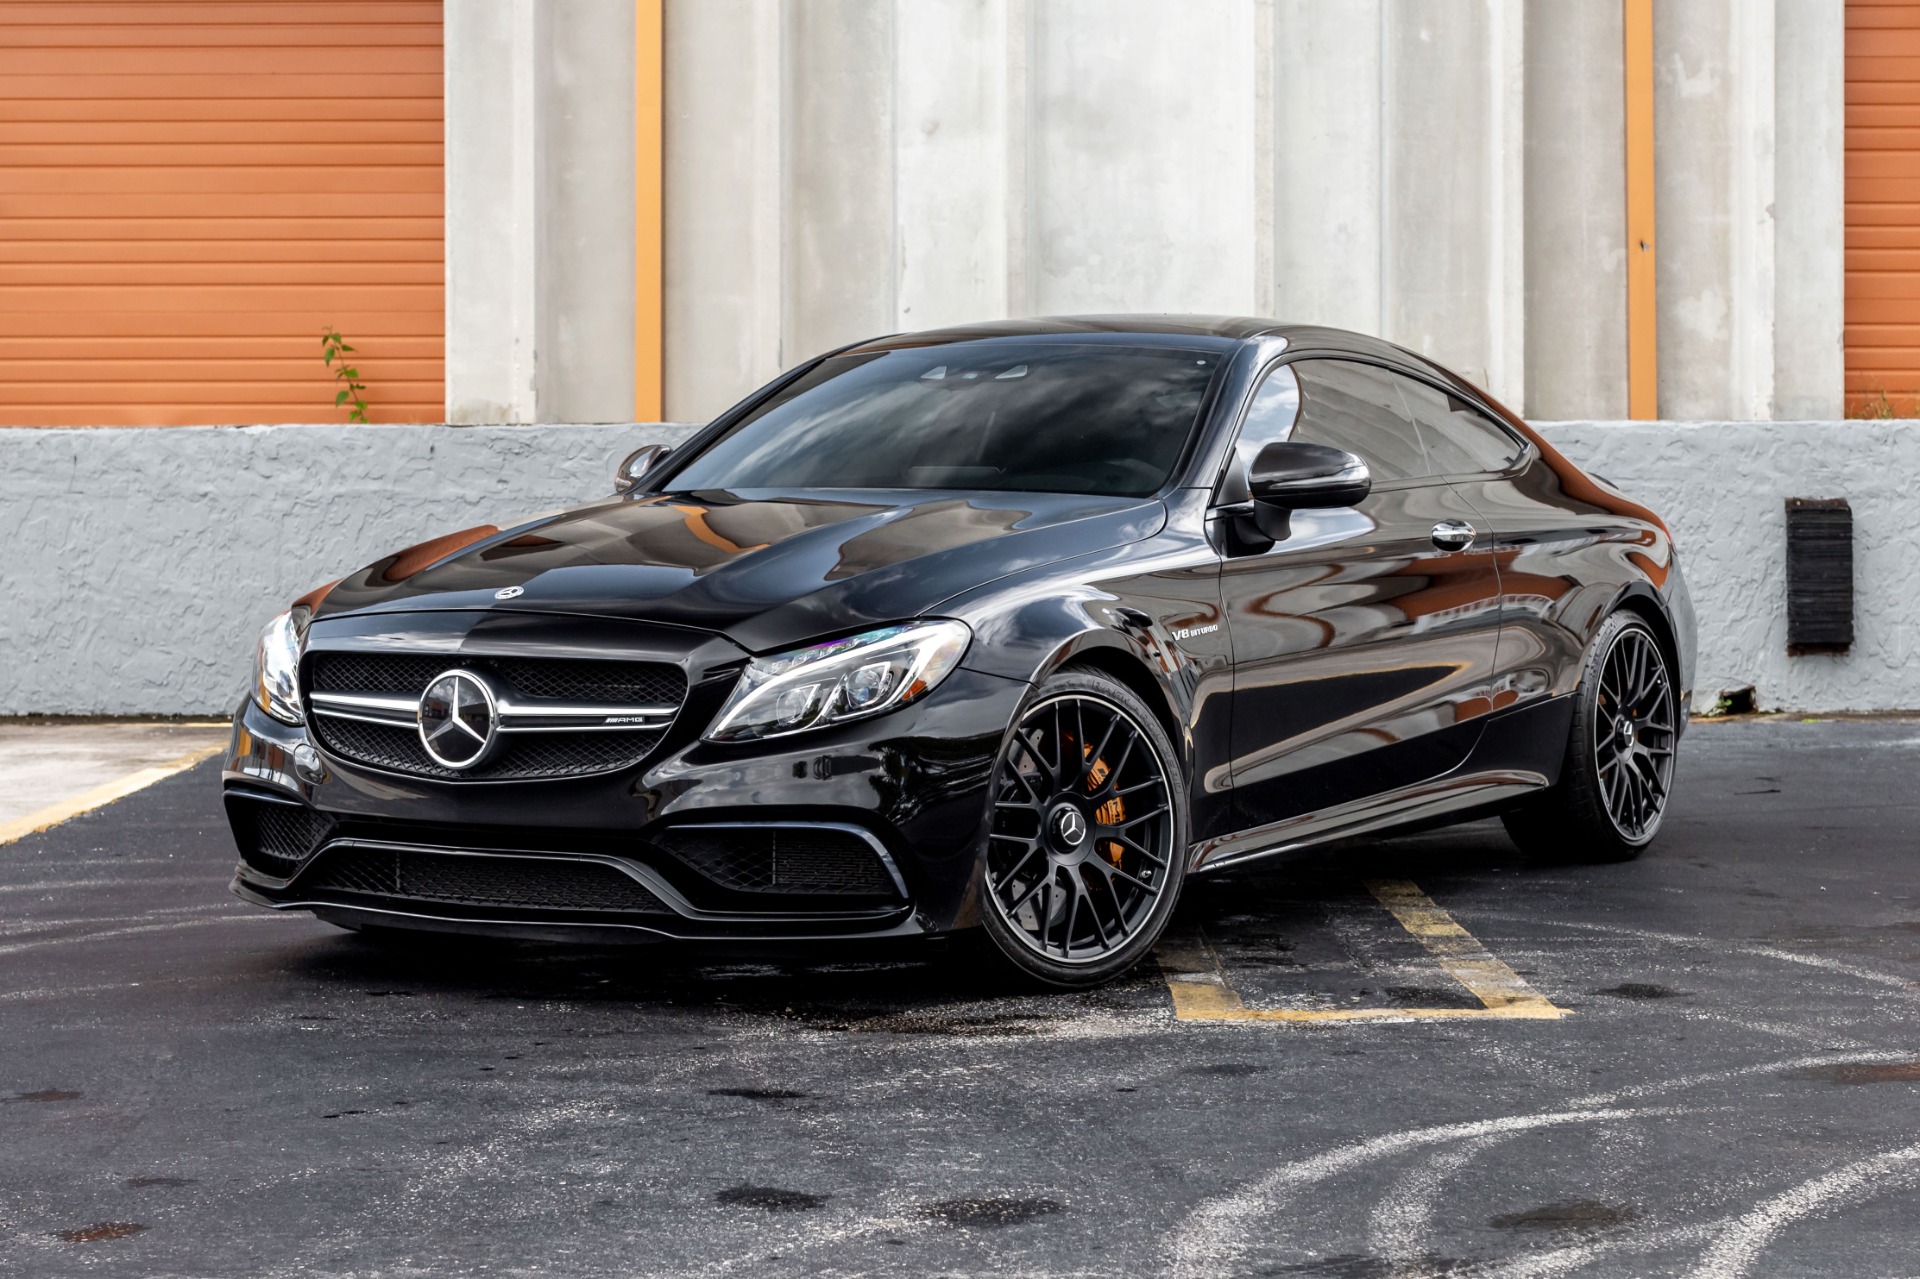 Used 2018 Mercedes-Benz C-Class AMG C 63 S Loaded with Factory Options inc.  Carbon Exterior Pack II For Sale (Sold)